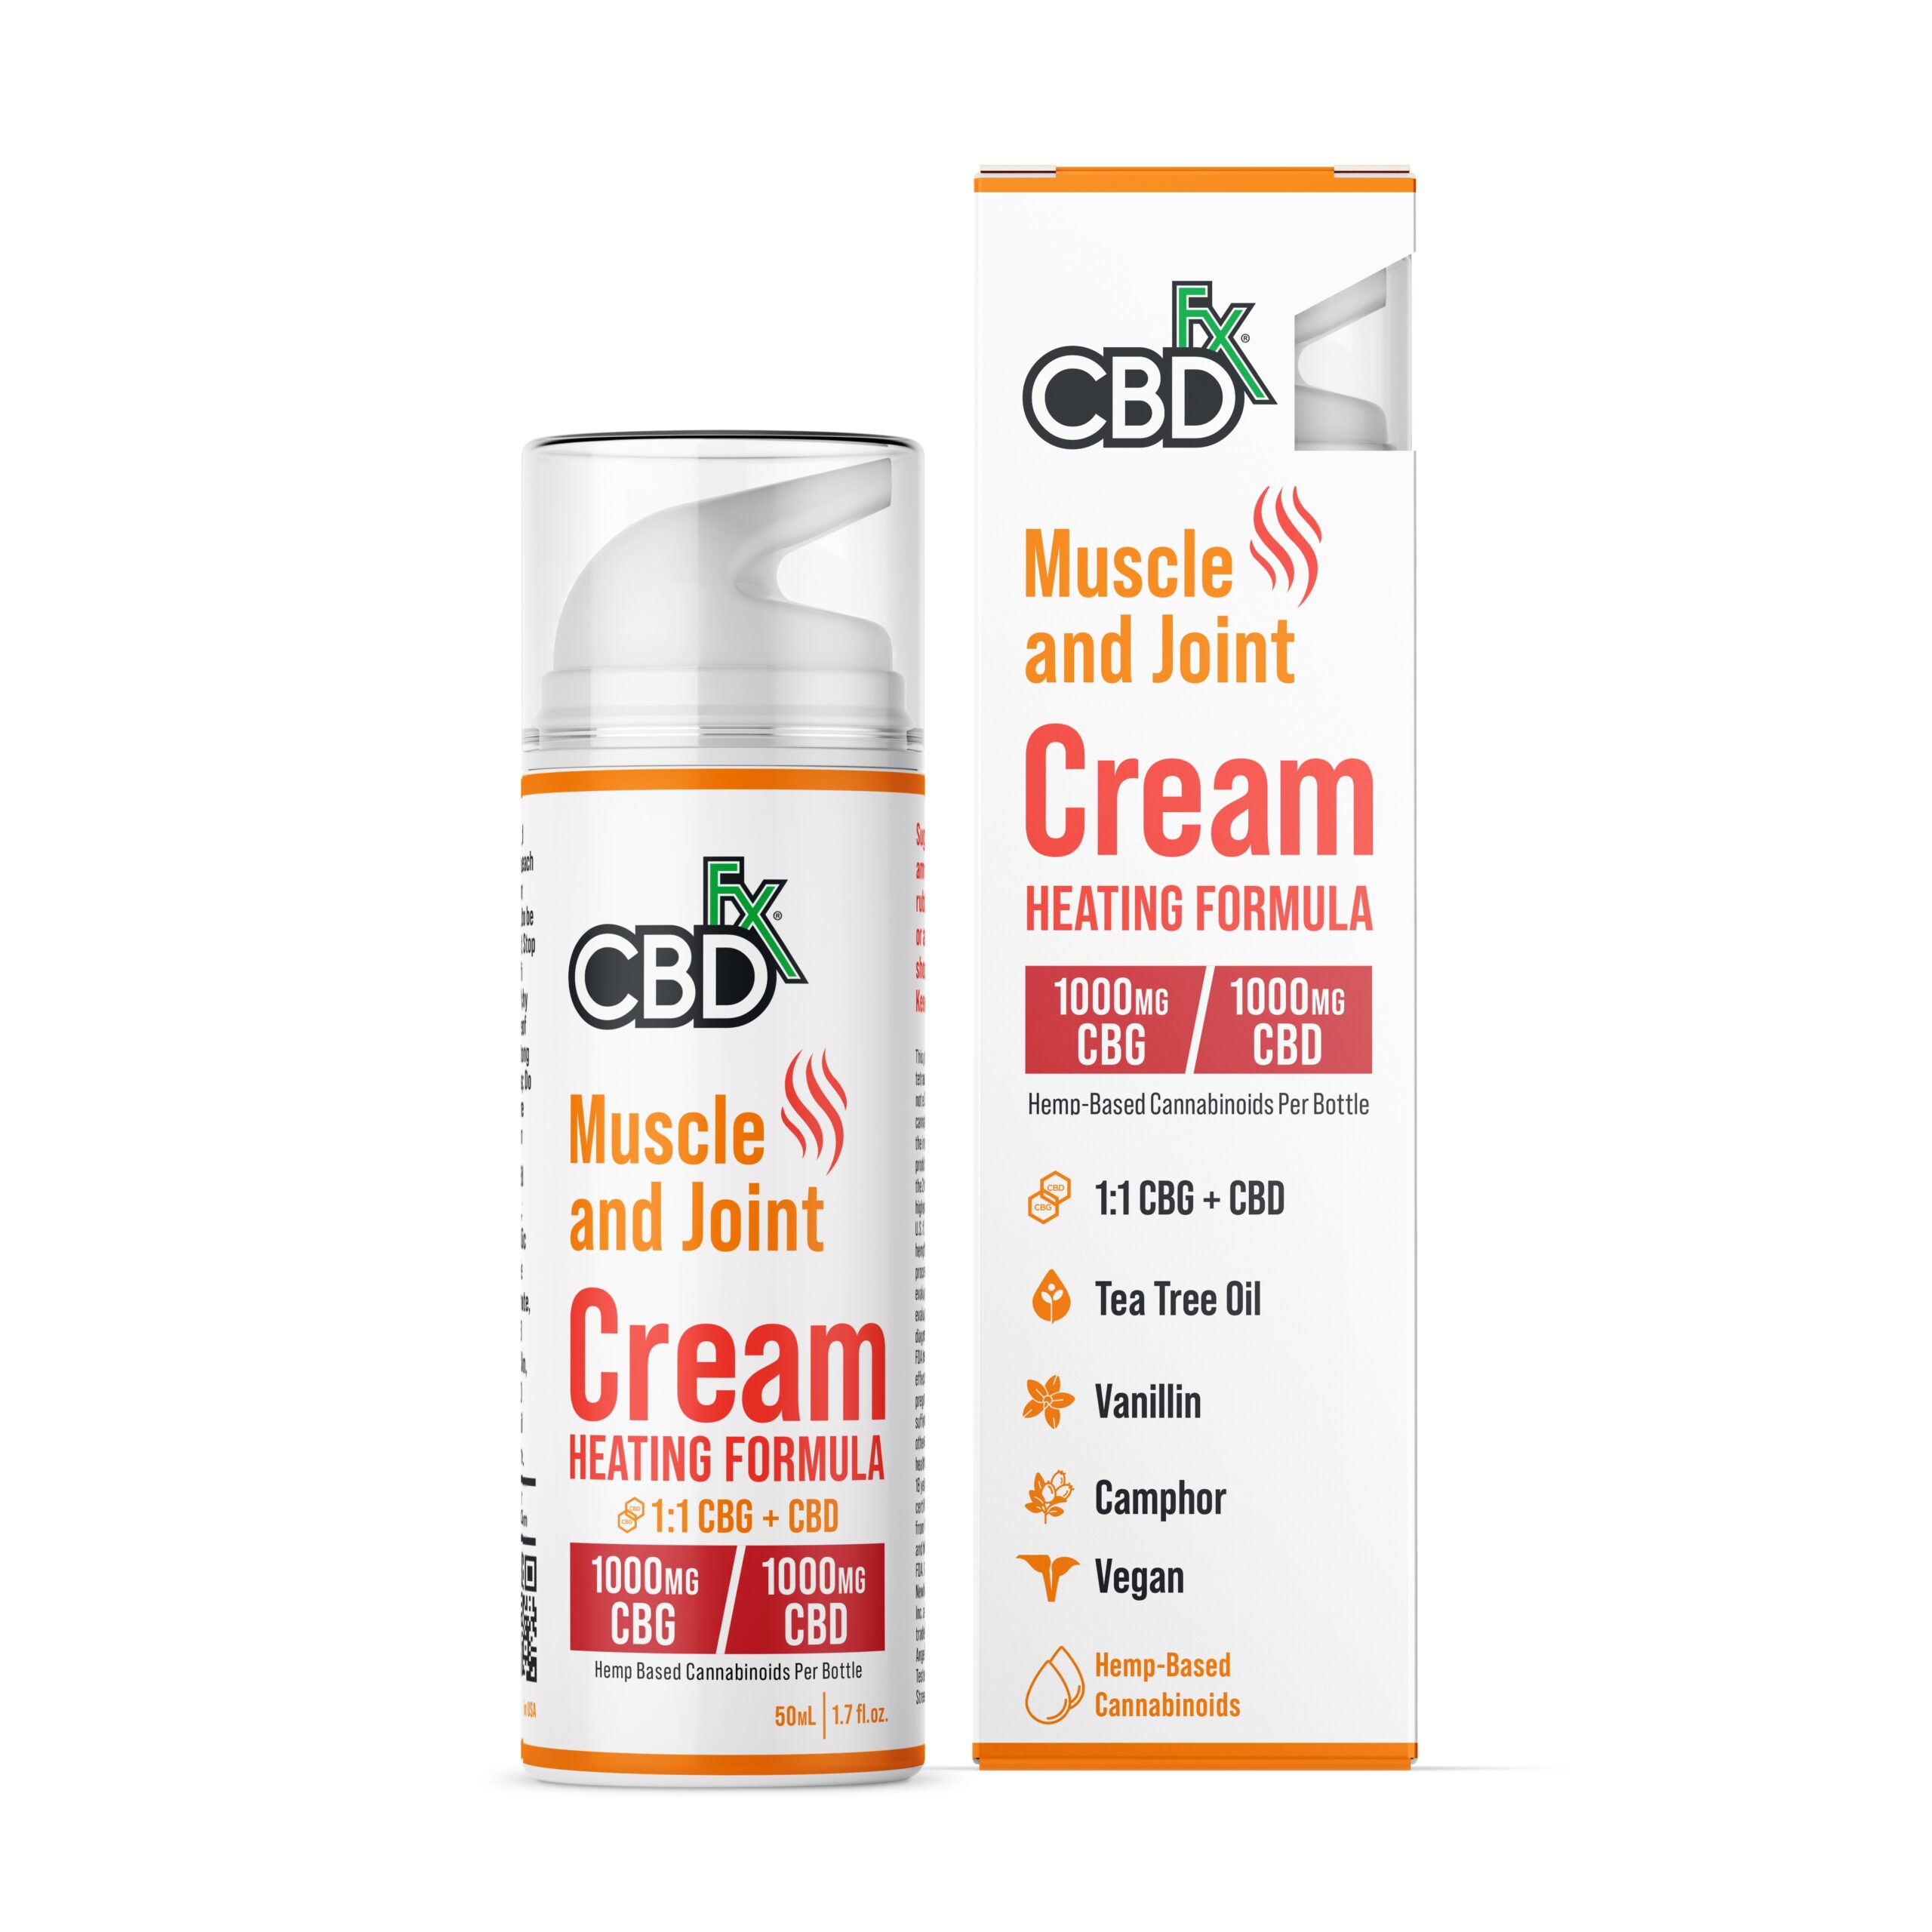 Cbg Cbd 11 Lotion For Muscle Joint Heating Formula 2000mg 2